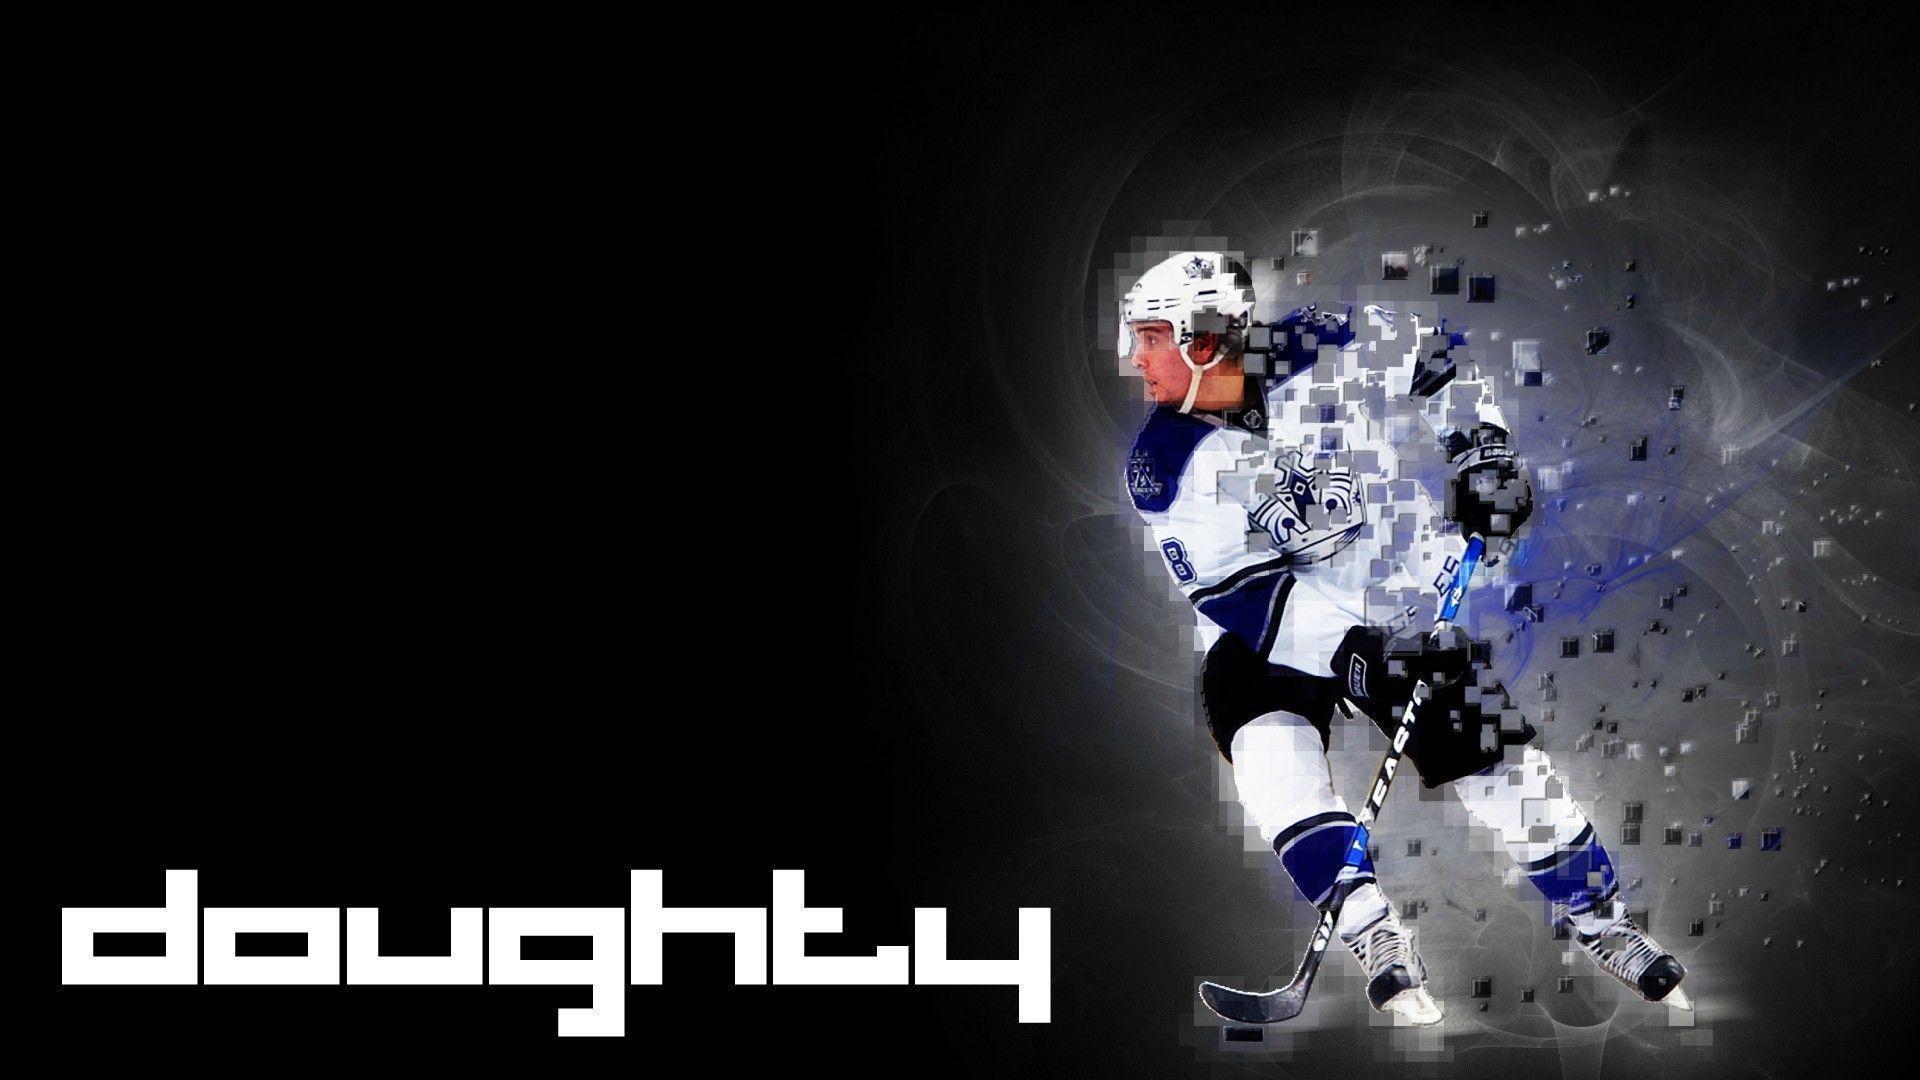 Best Hockey player Drew Doughty wallpaper and image